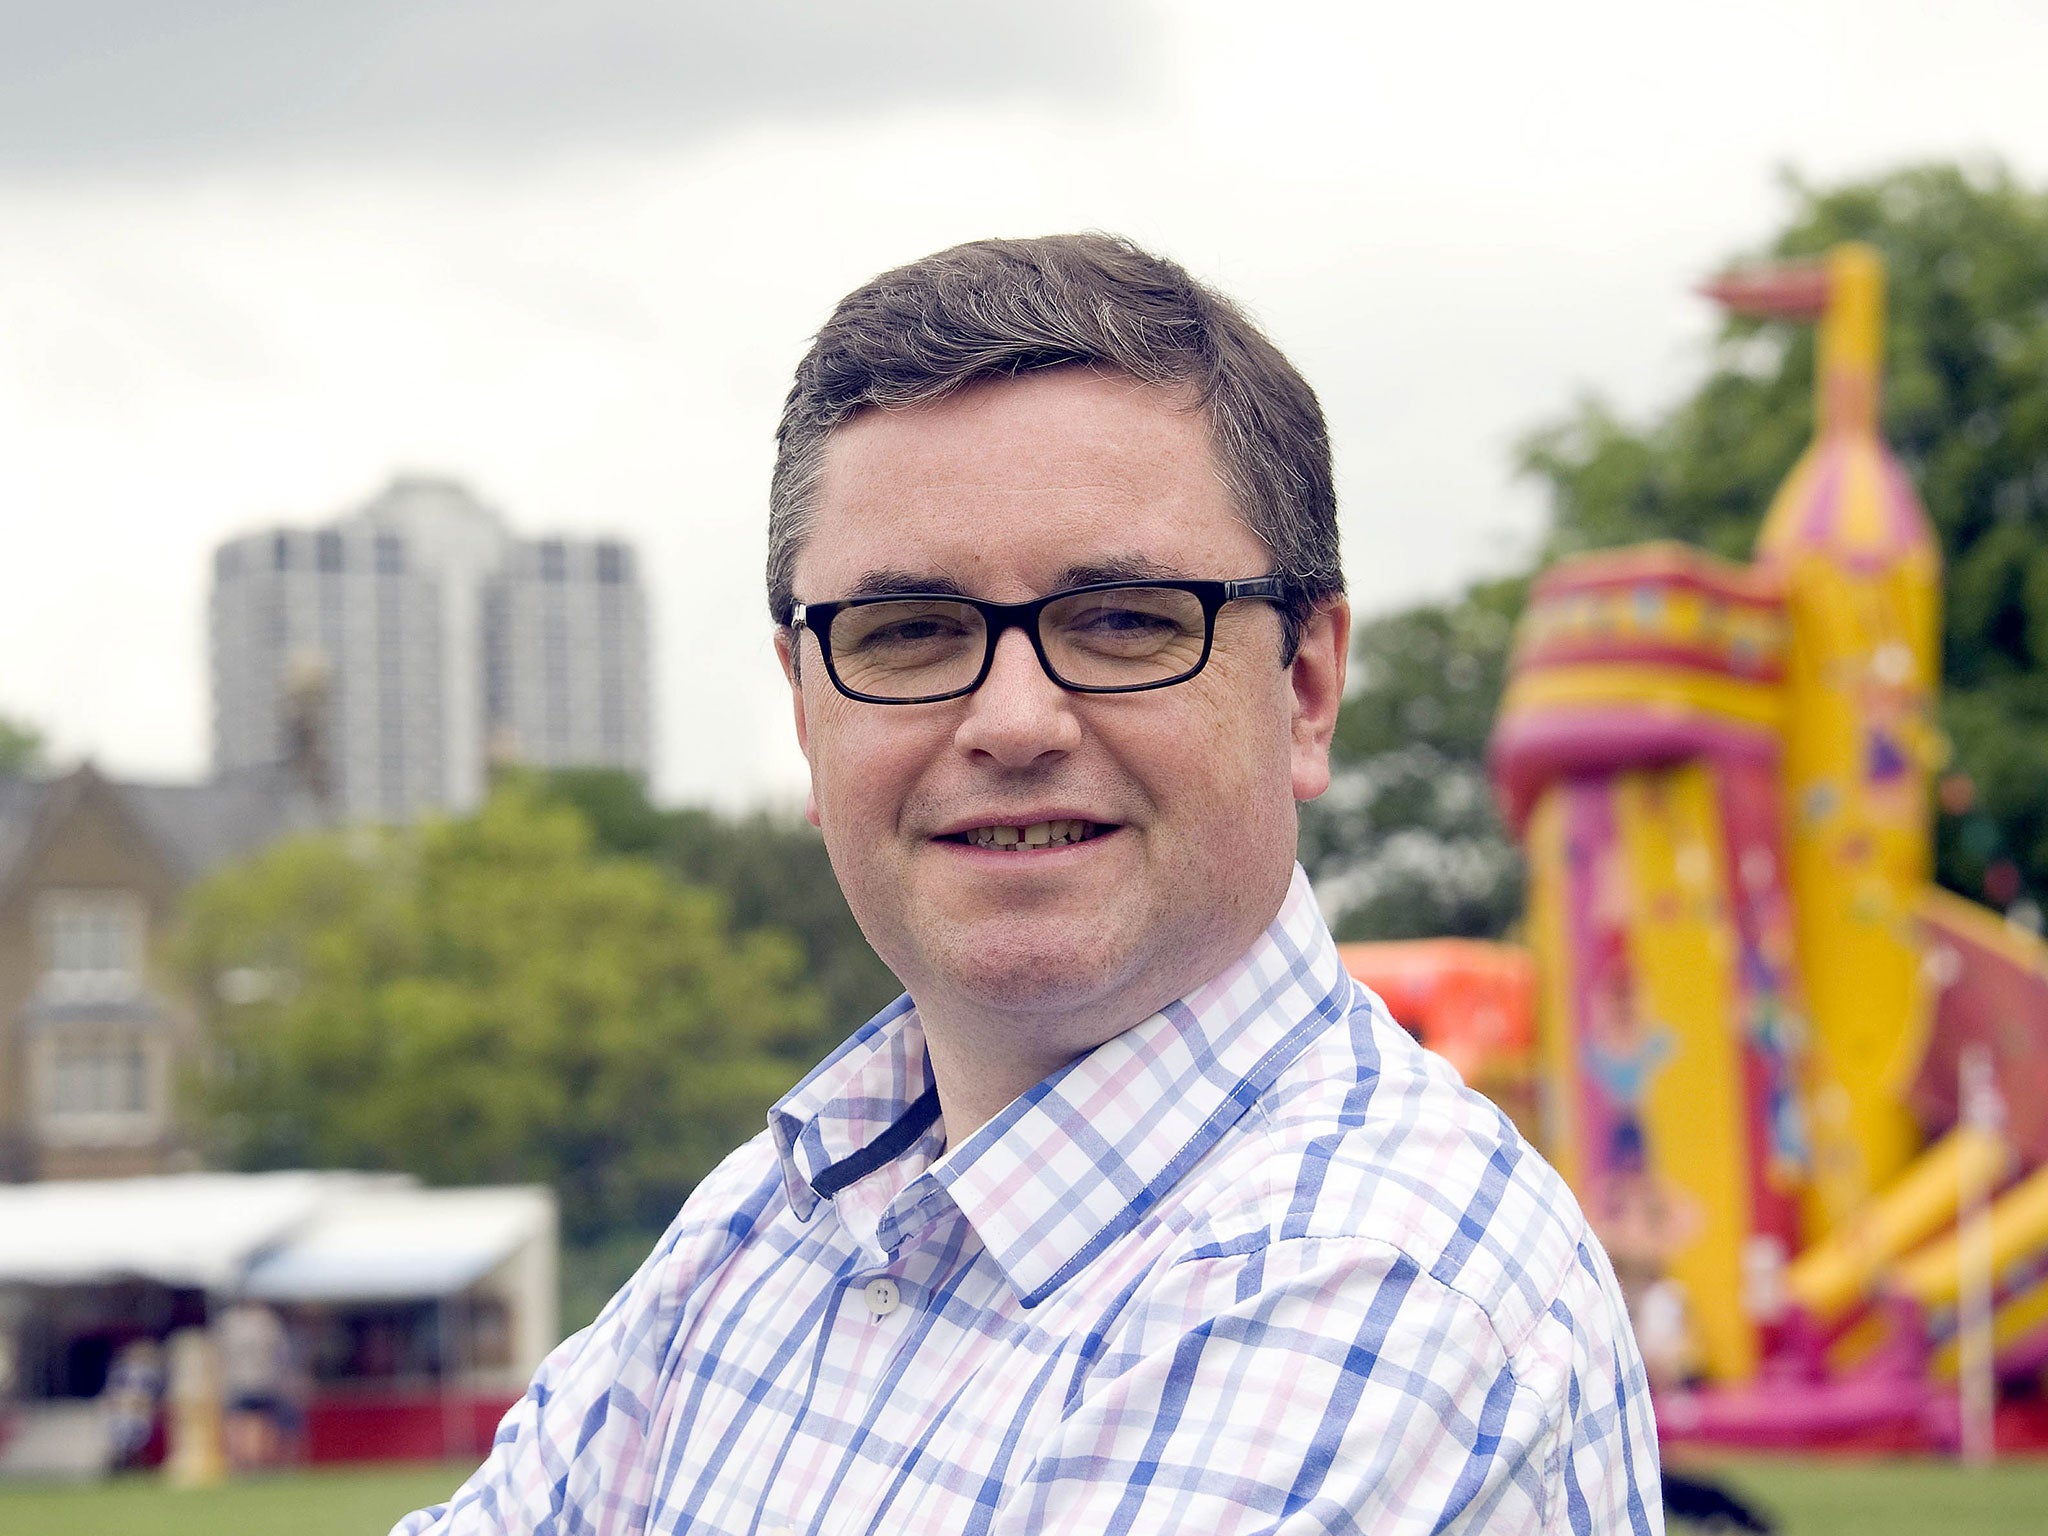 Robert Buckland, the Solicitor General and MP ffor Swindon South, was an investor in a film partnership under investigation by HMRC